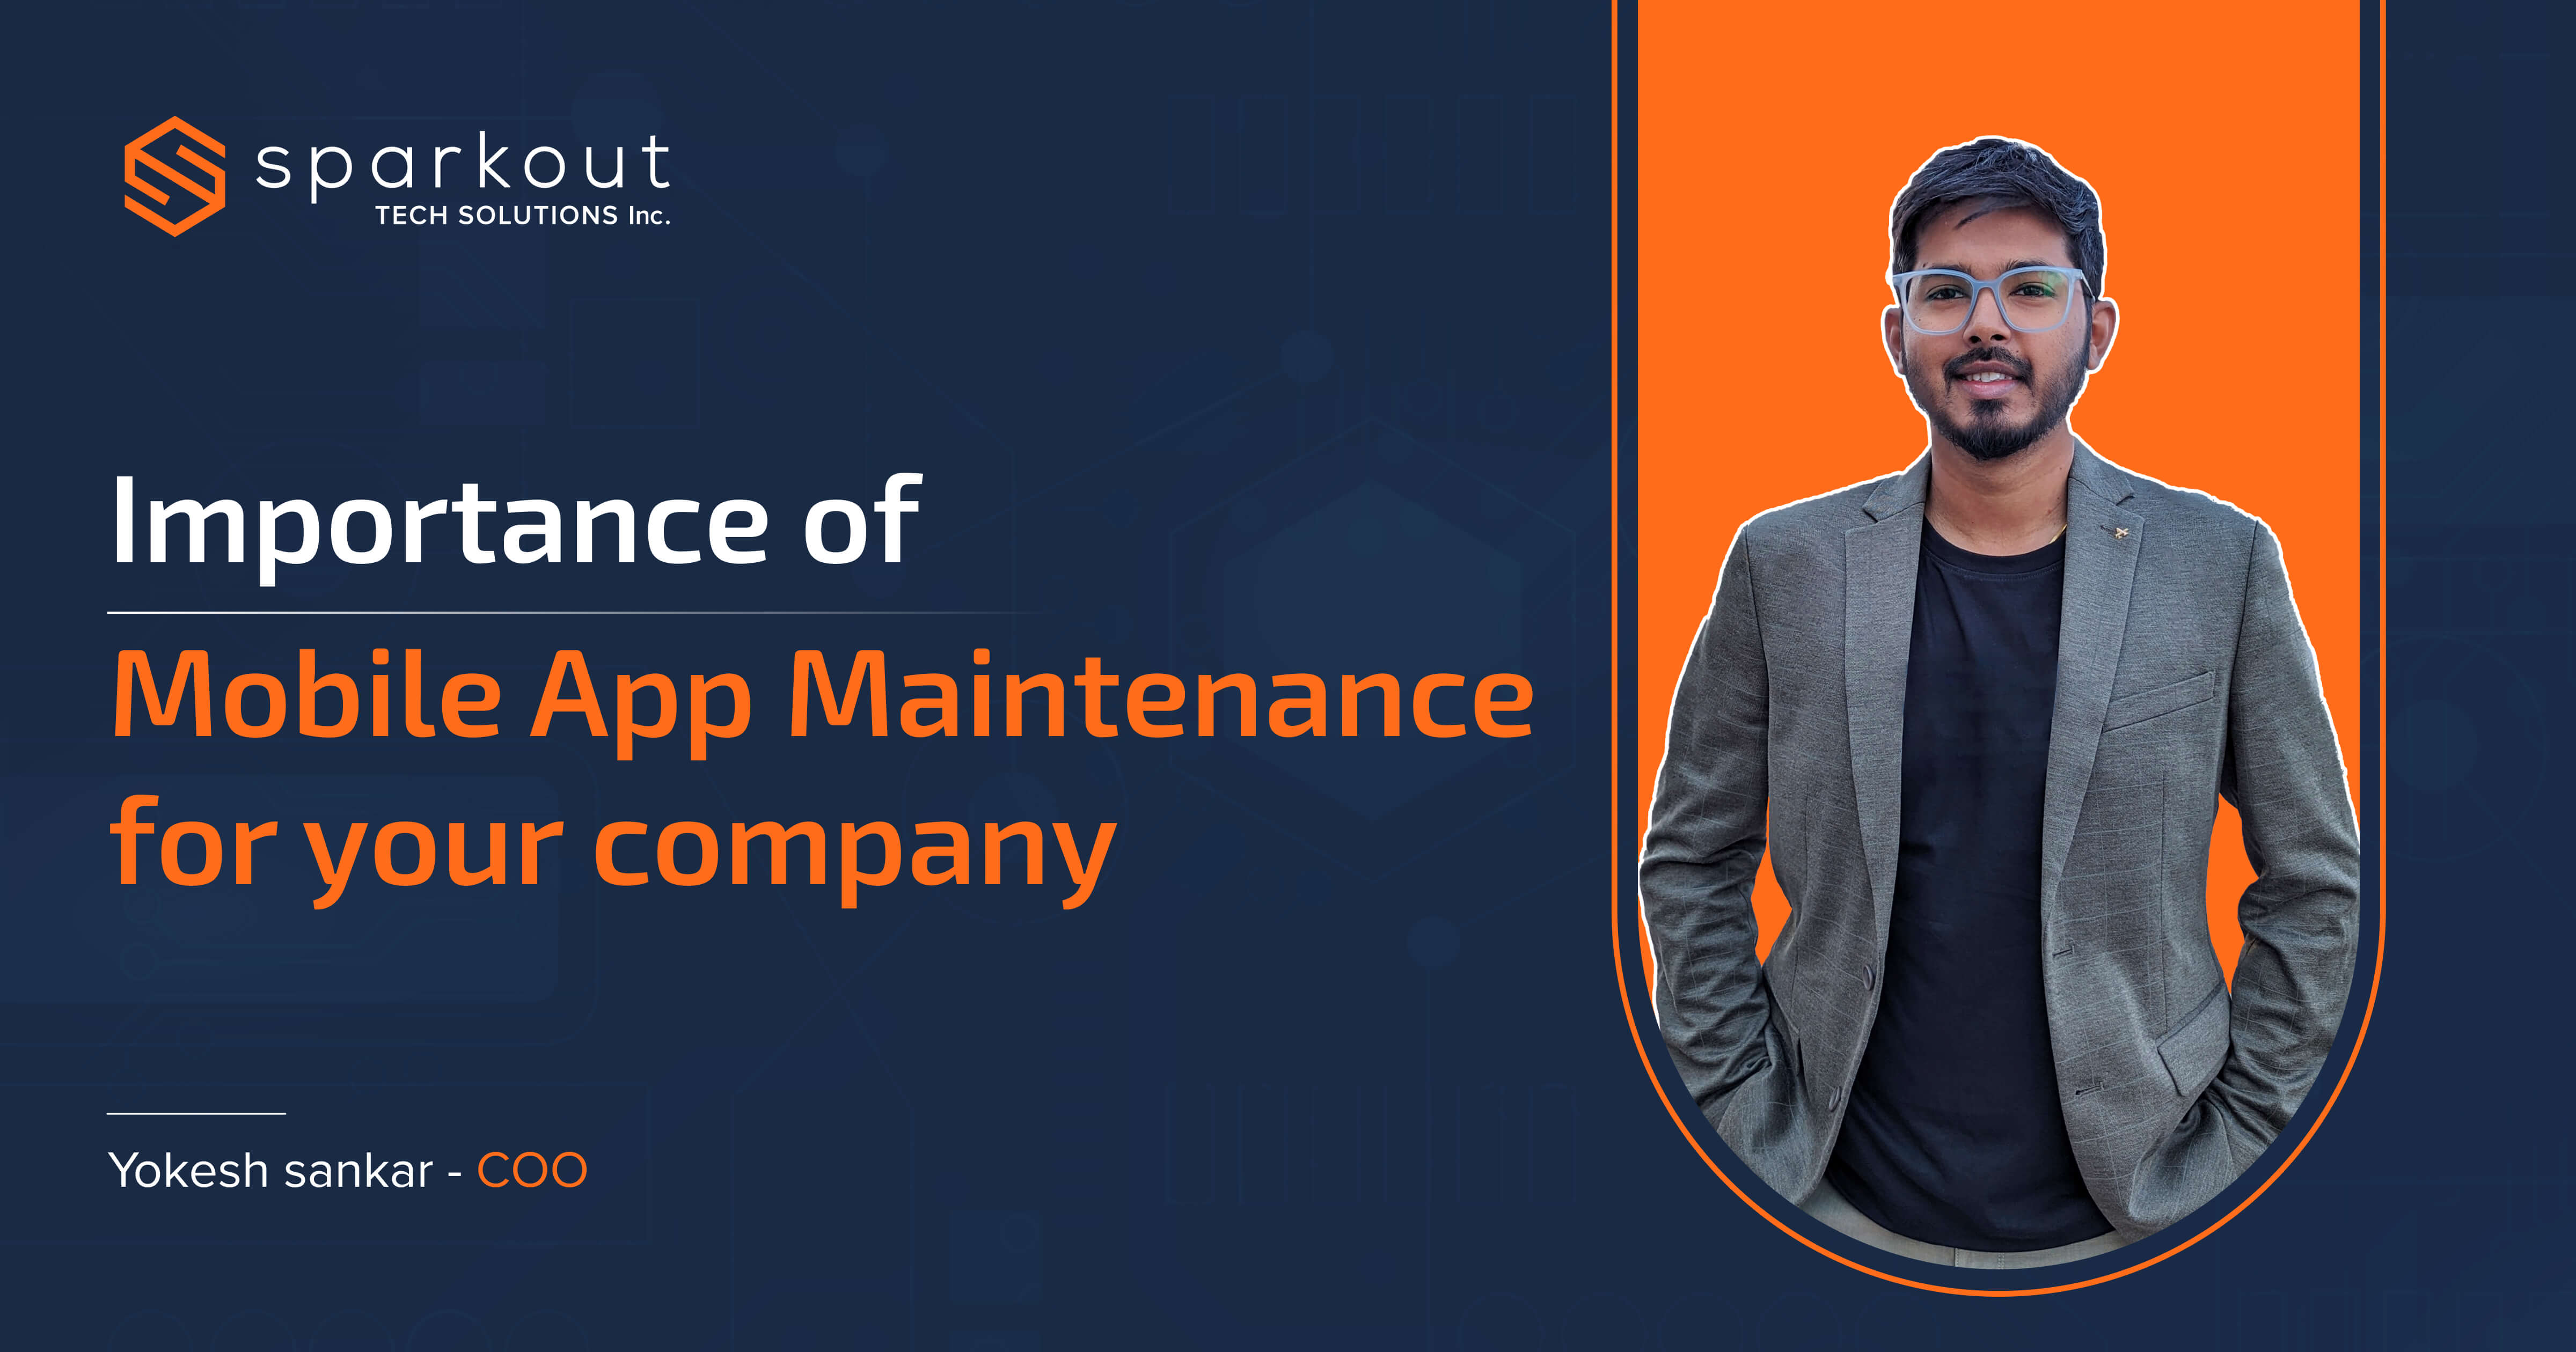 Importance of Mobile App Maintenance for your company